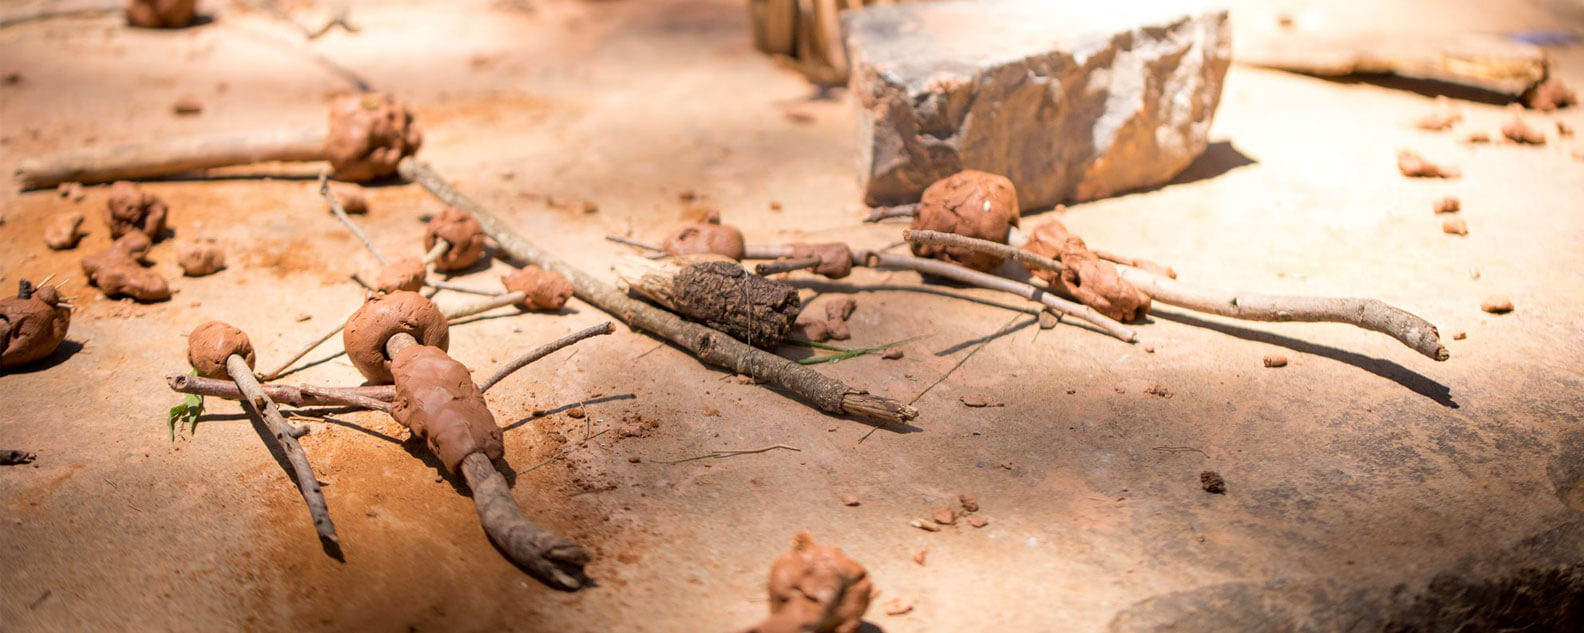 A collections of sticks in different shapes and sizes lying on a piece of sandstone.